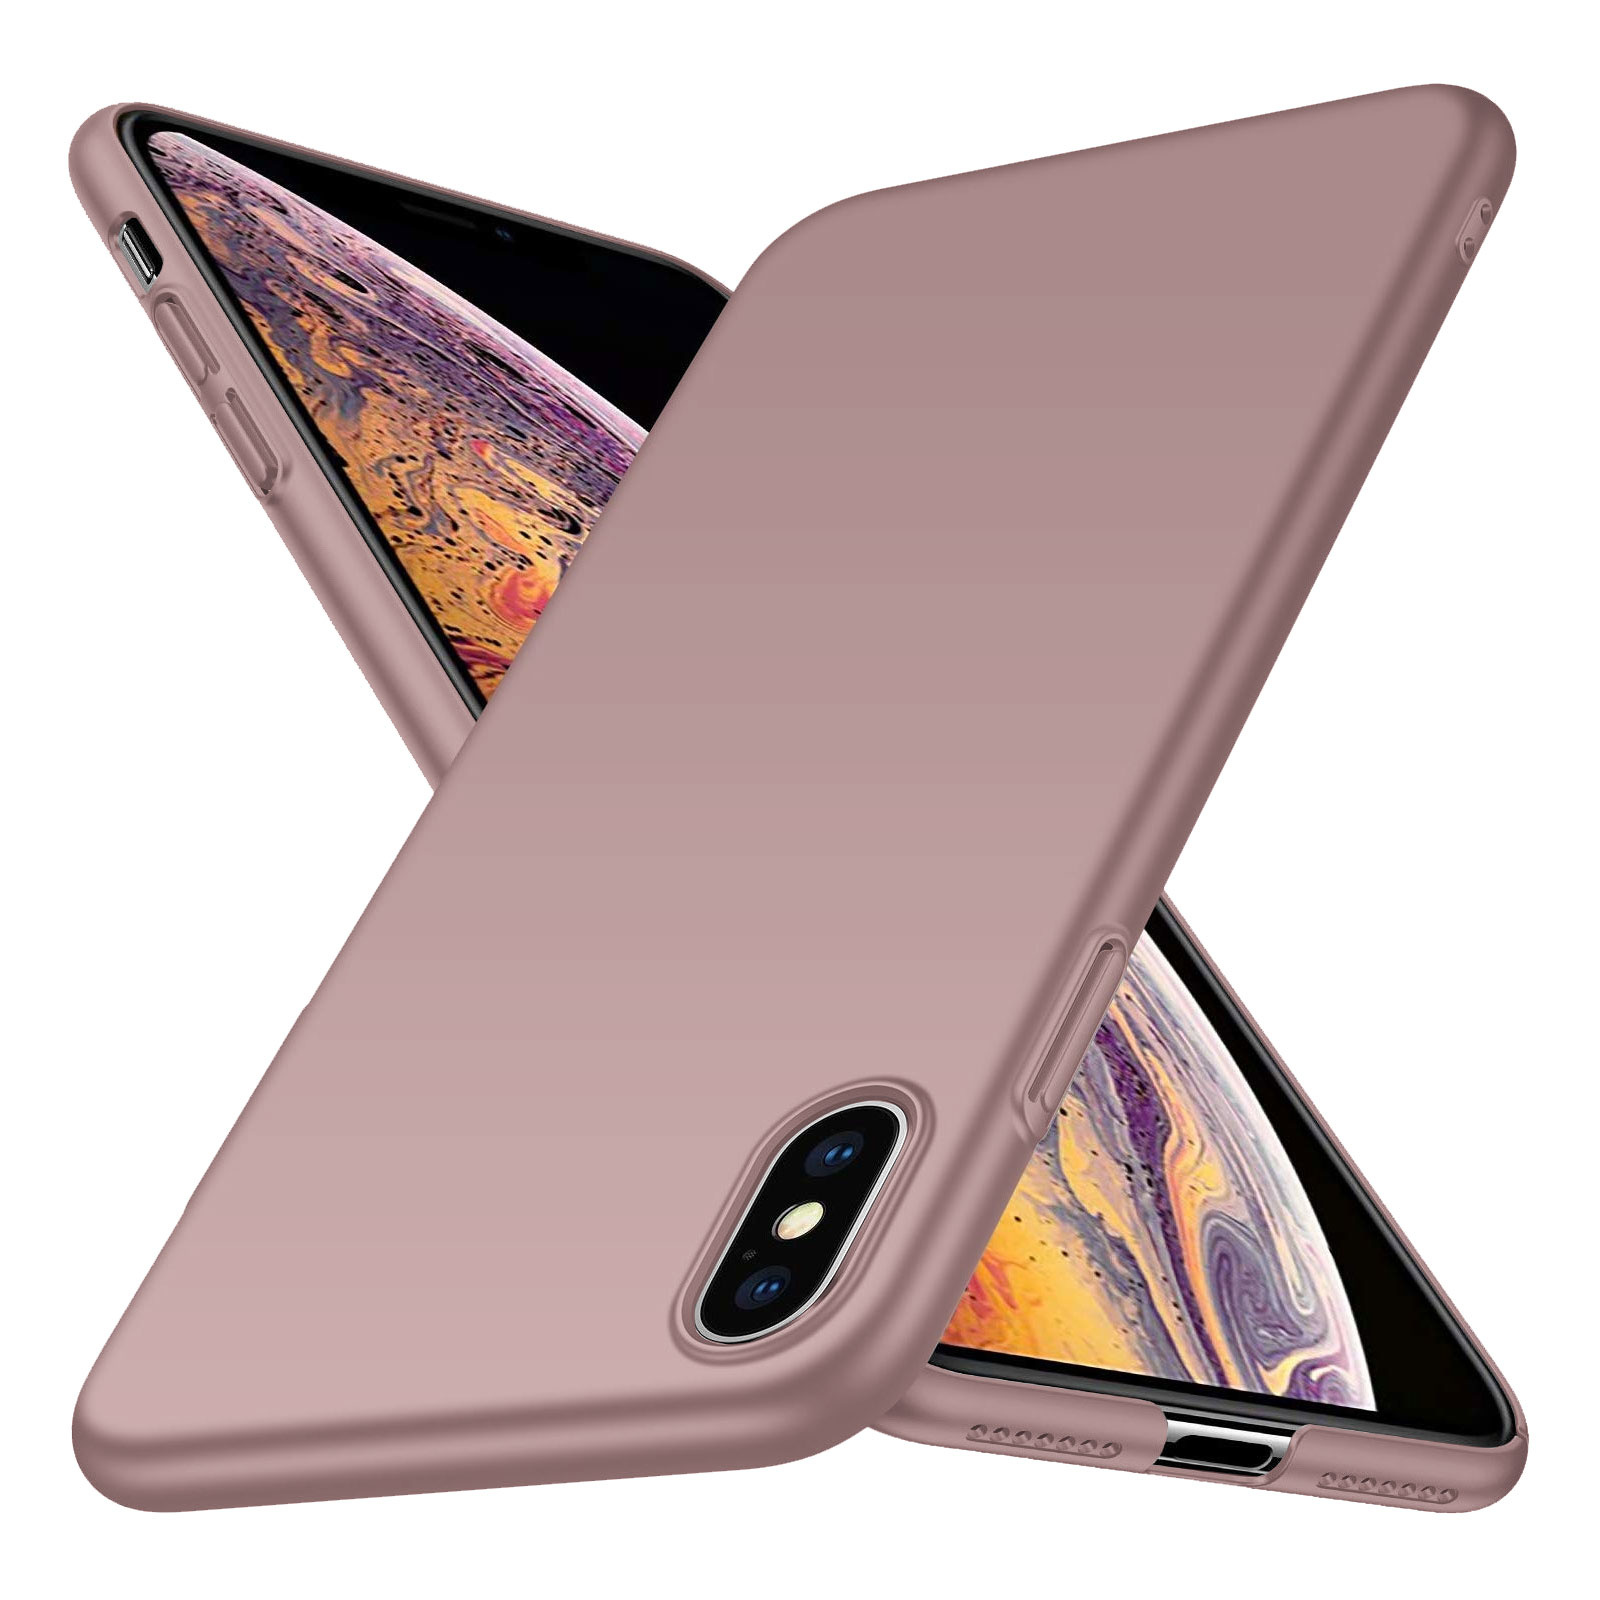 Teleurgesteld Vermindering overdracht Back Case Cover iPhone Xs Max Hoesje Pink Powder - Geeektech.com